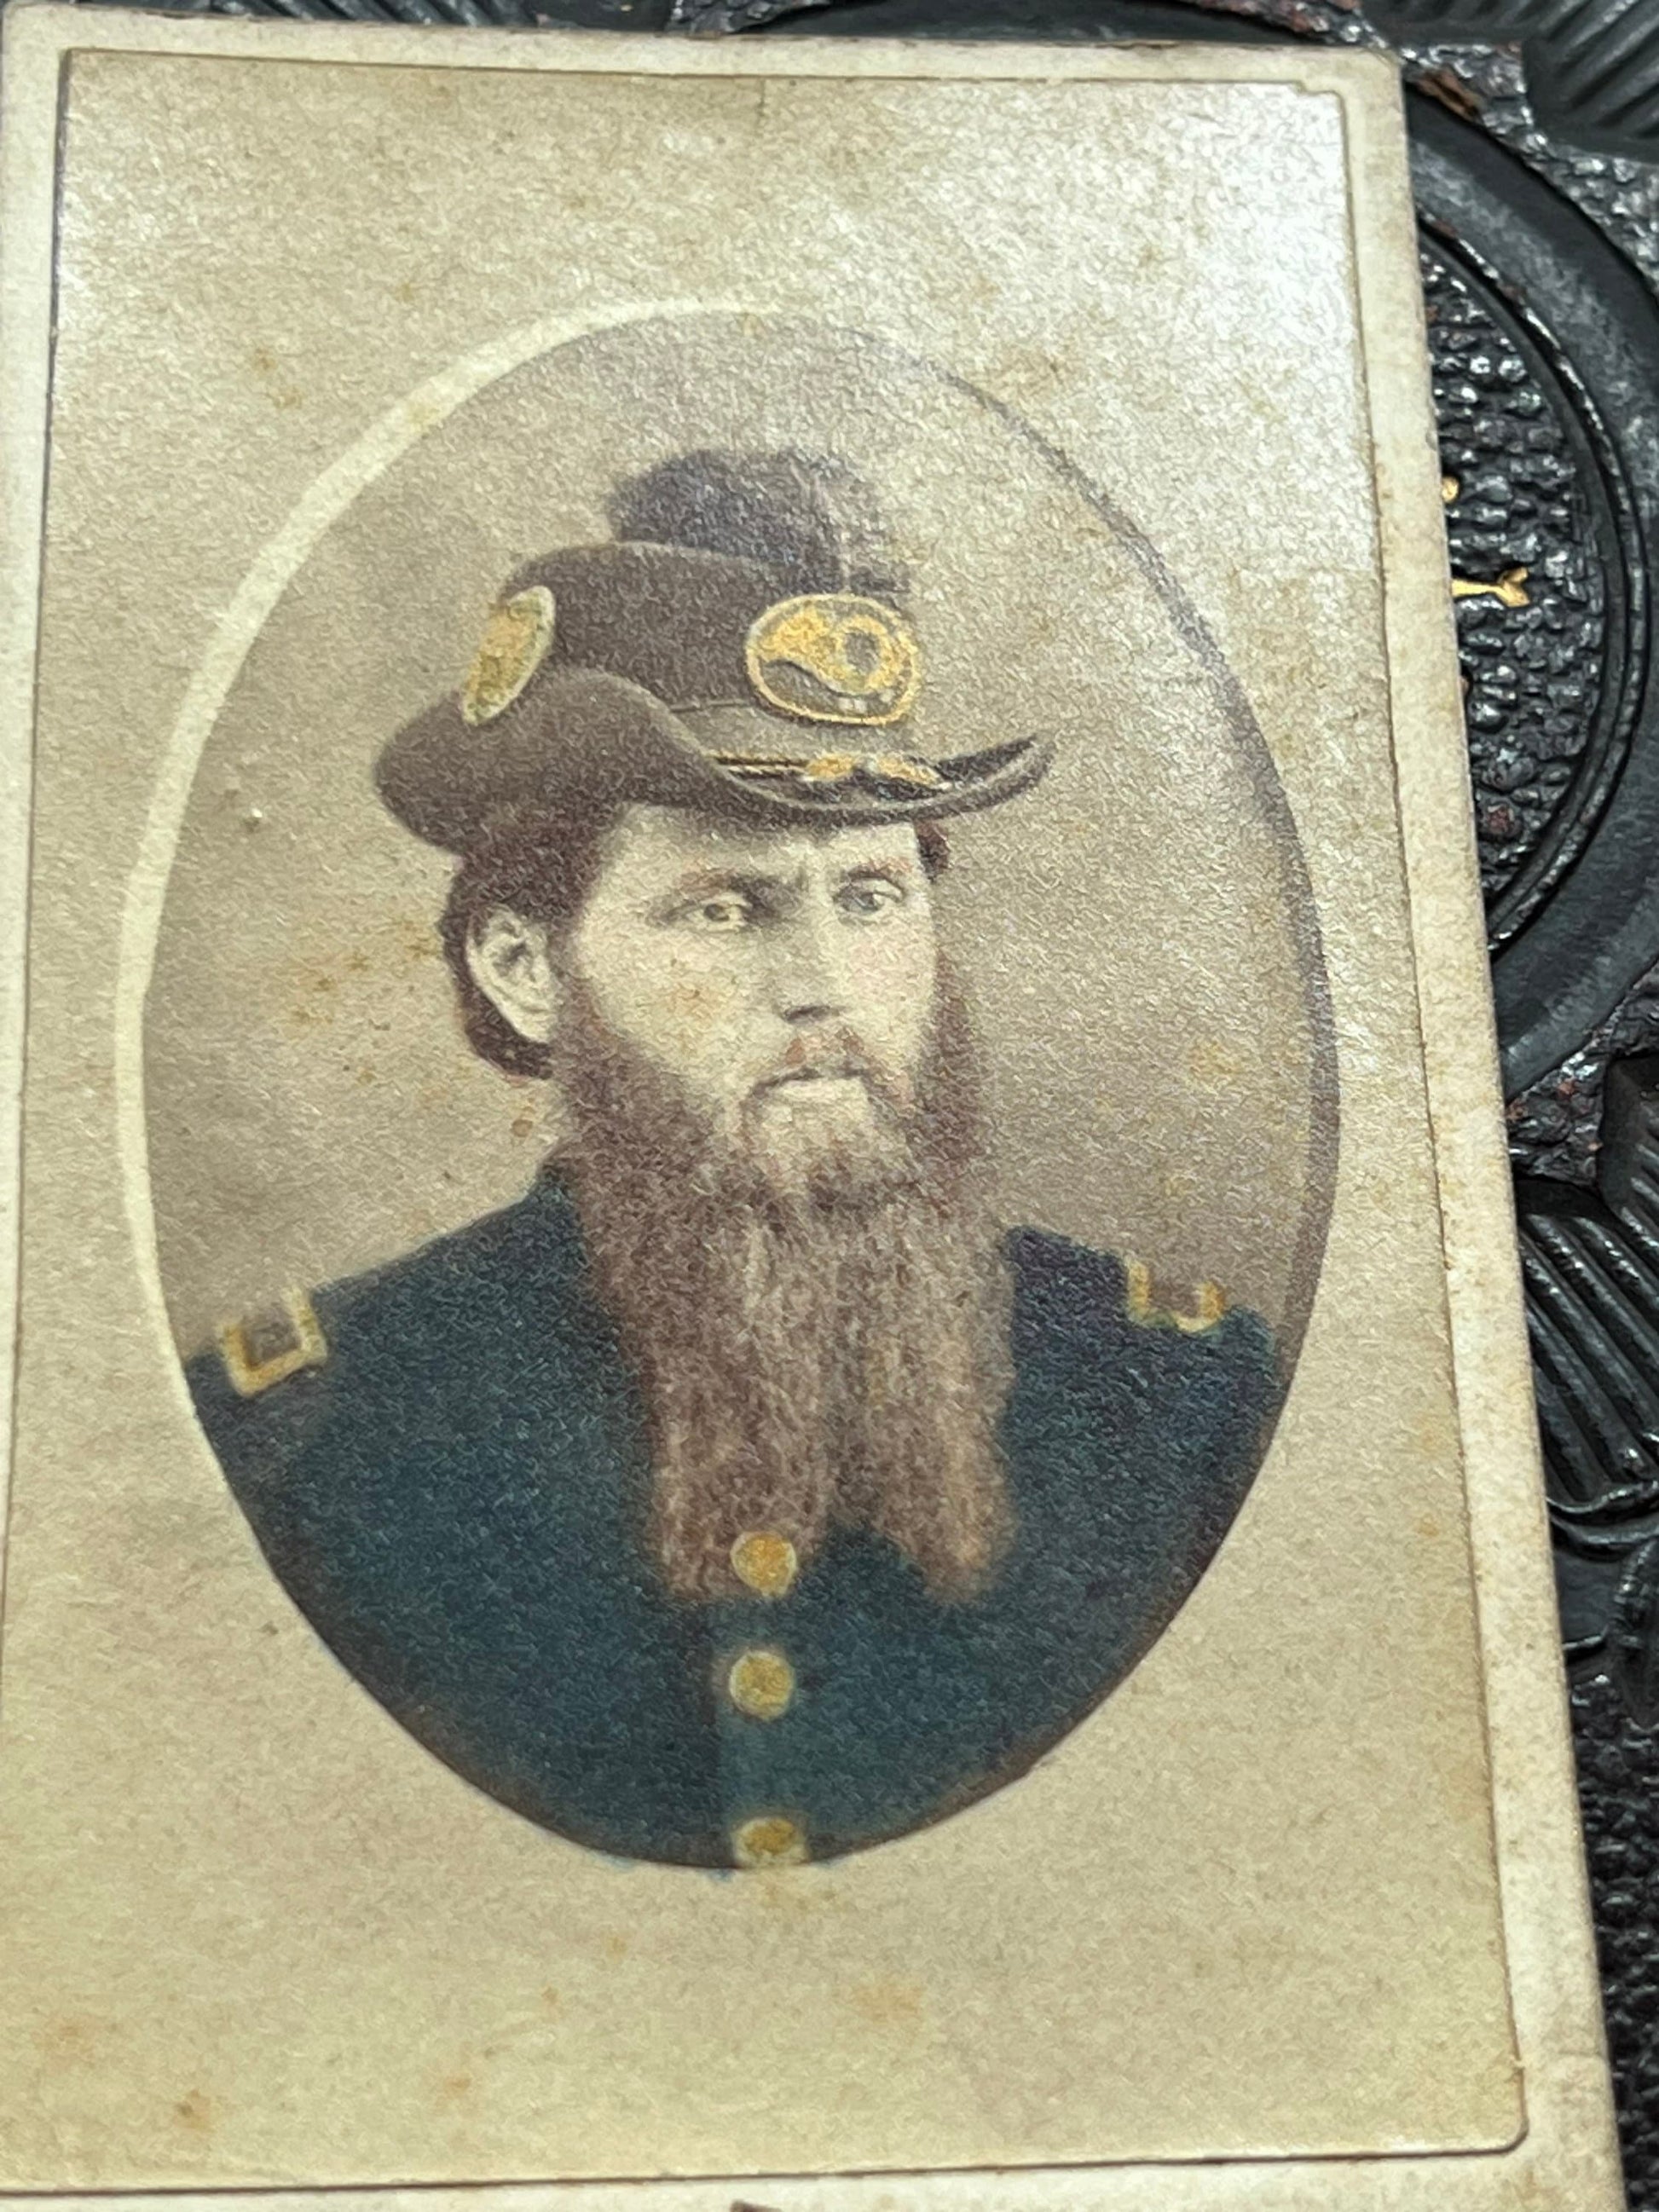 Antique cdv photo civil war soldier 207th Pennsylvania infantry 1864 idd excellent hand tinting